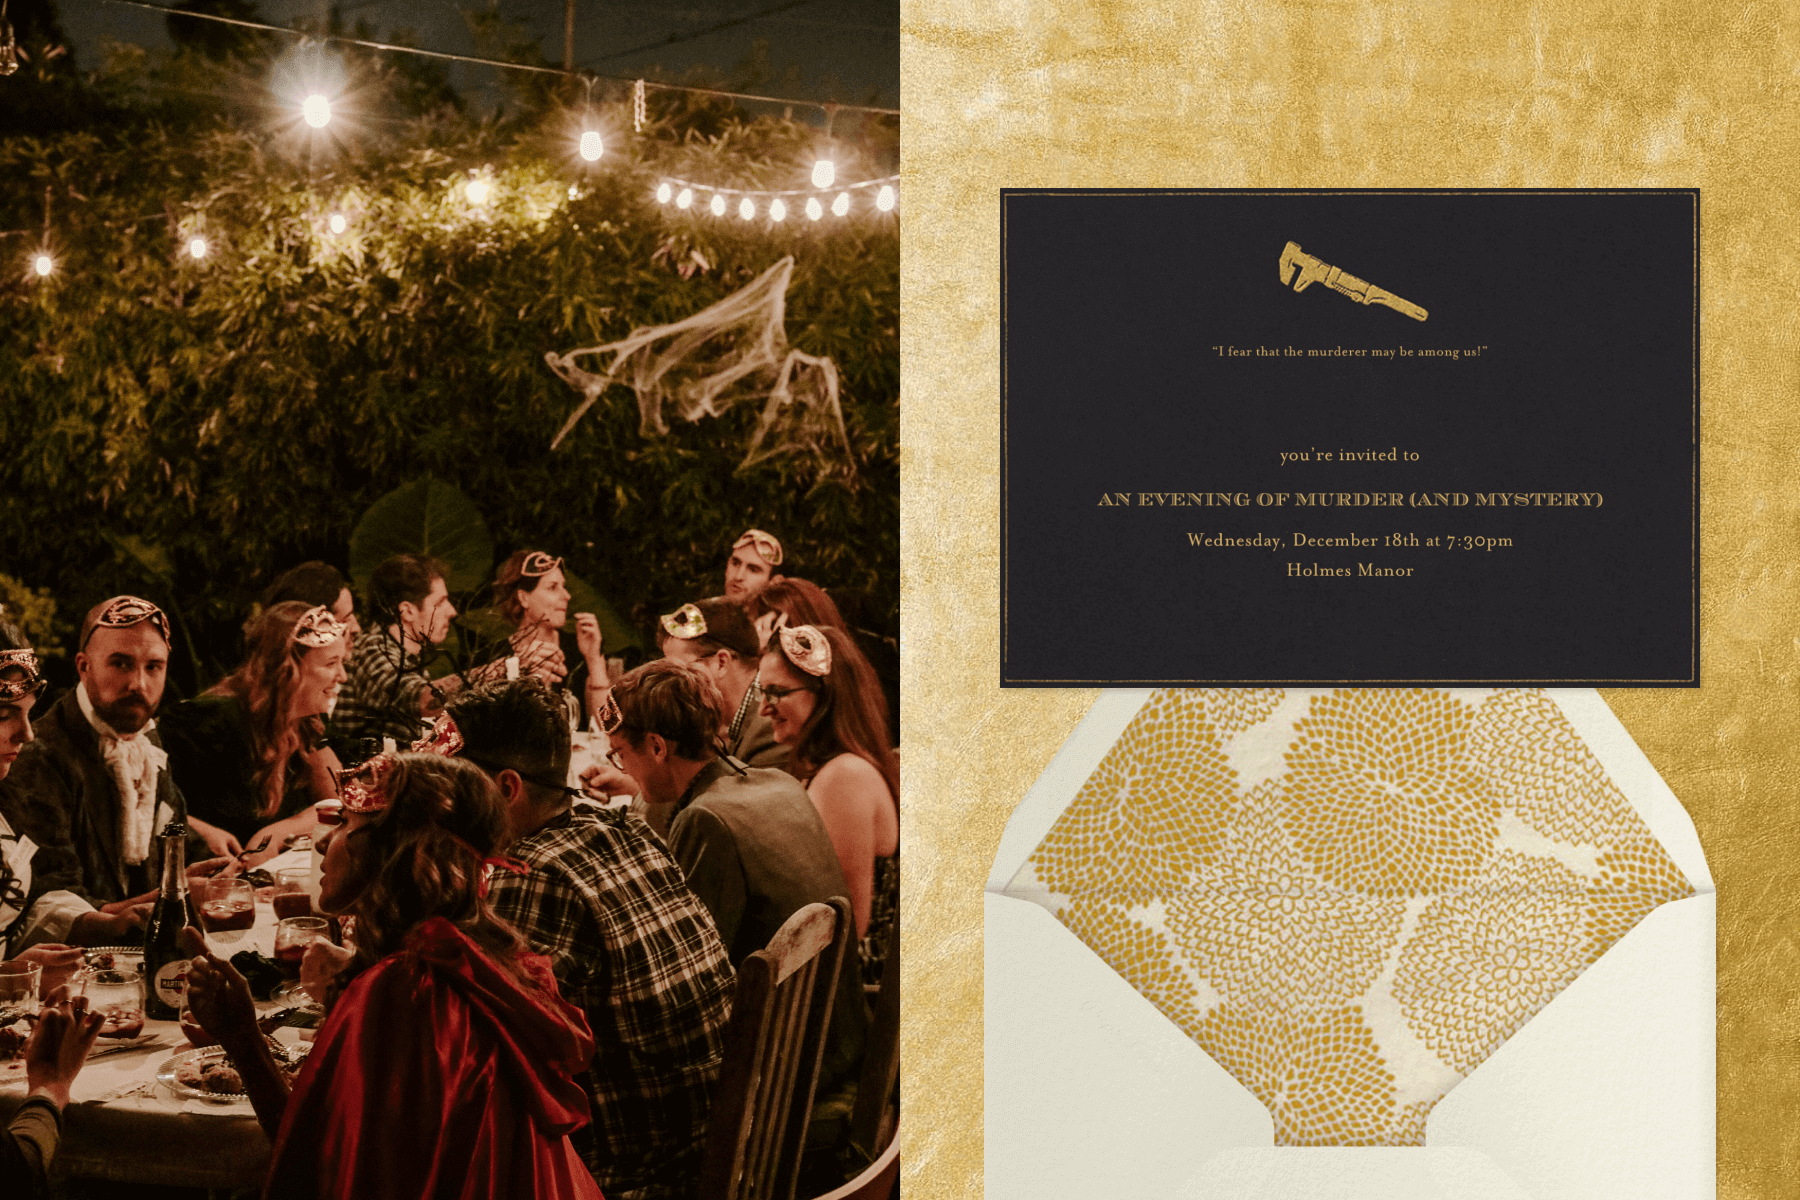 left: People dining outside at night wearing masquerade attire. Right: A black invitation with a small gold wrench.